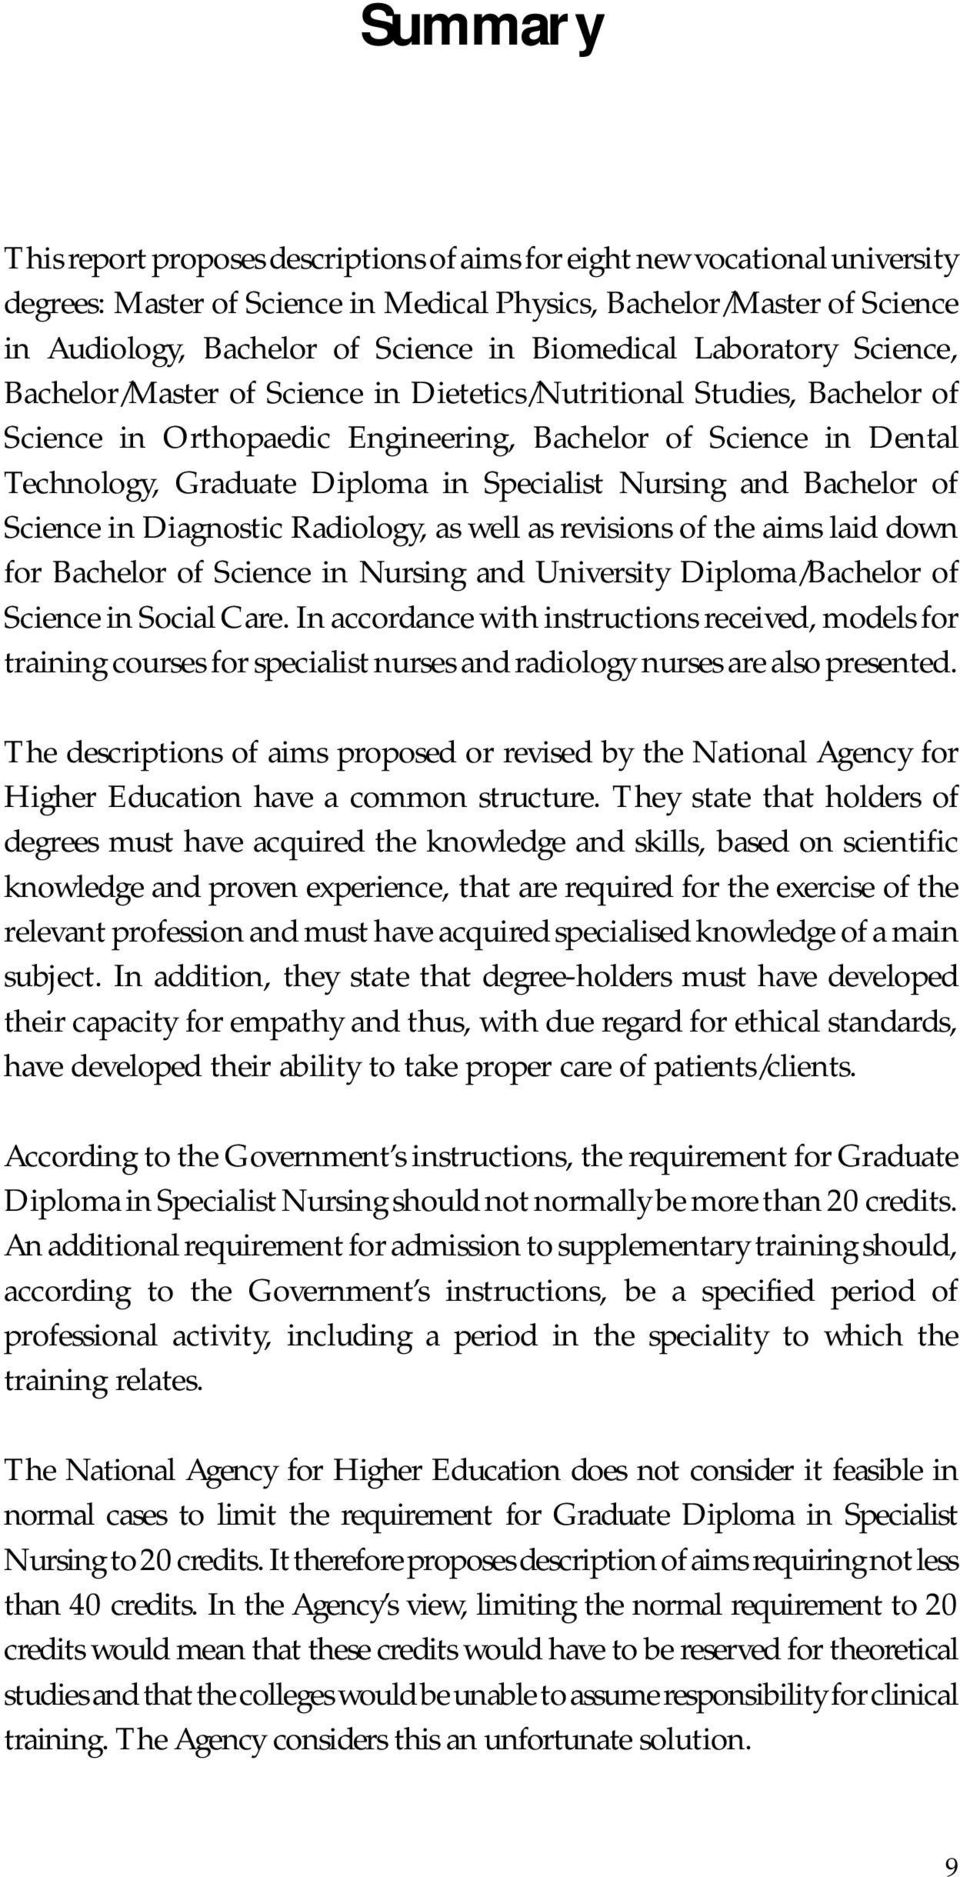 in Specialist Nursing and Bachelor of Science in Diagnostic Radiology, as well as revisions of the aims laid down for Bachelor of Science in Nursing and University Diploma/Bachelor of Science in